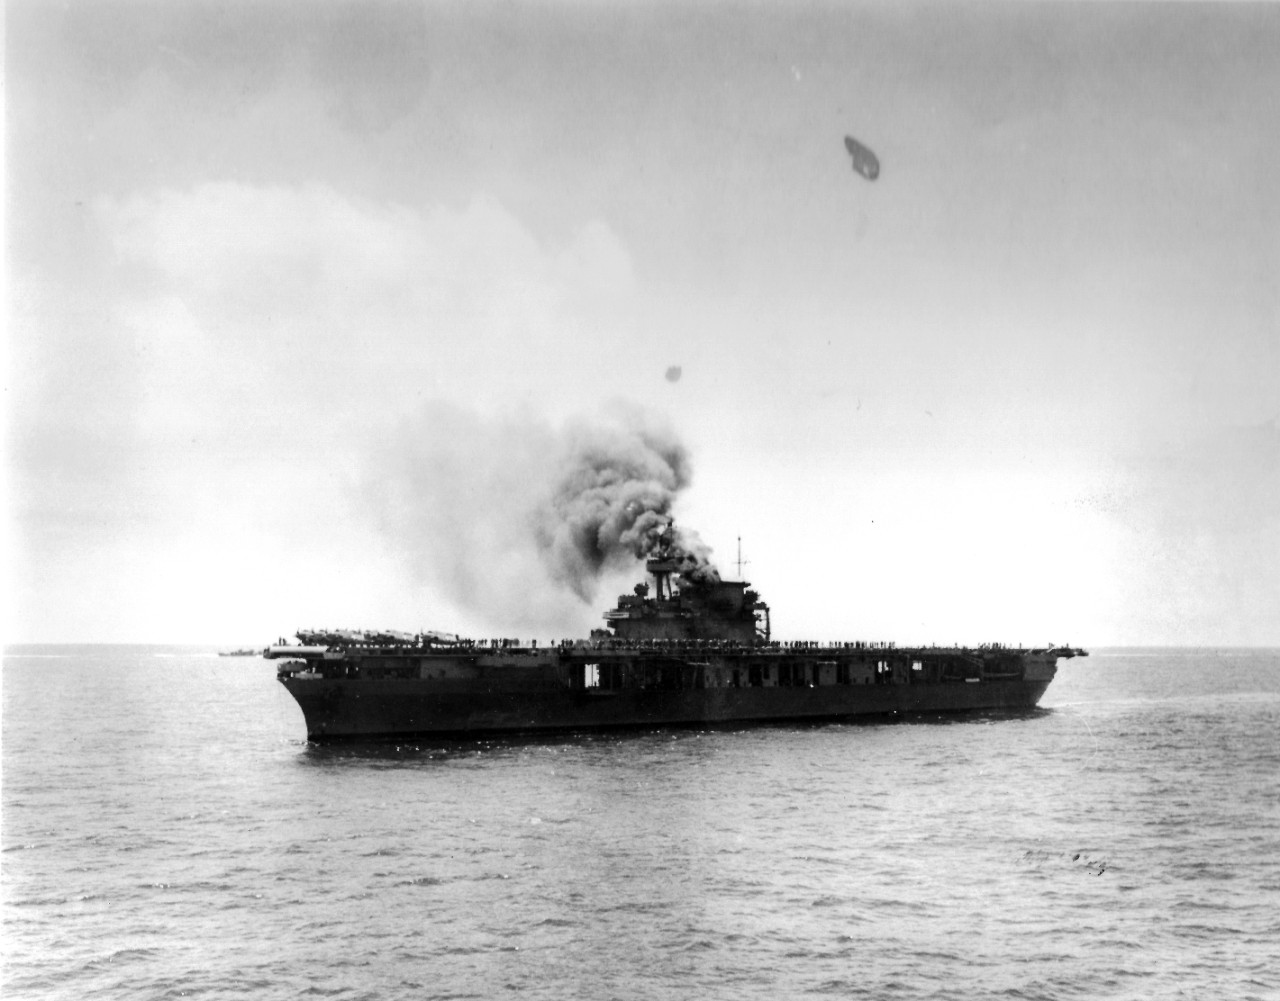 Photo #: 80-G-32300  Battle of Midway, June 1942